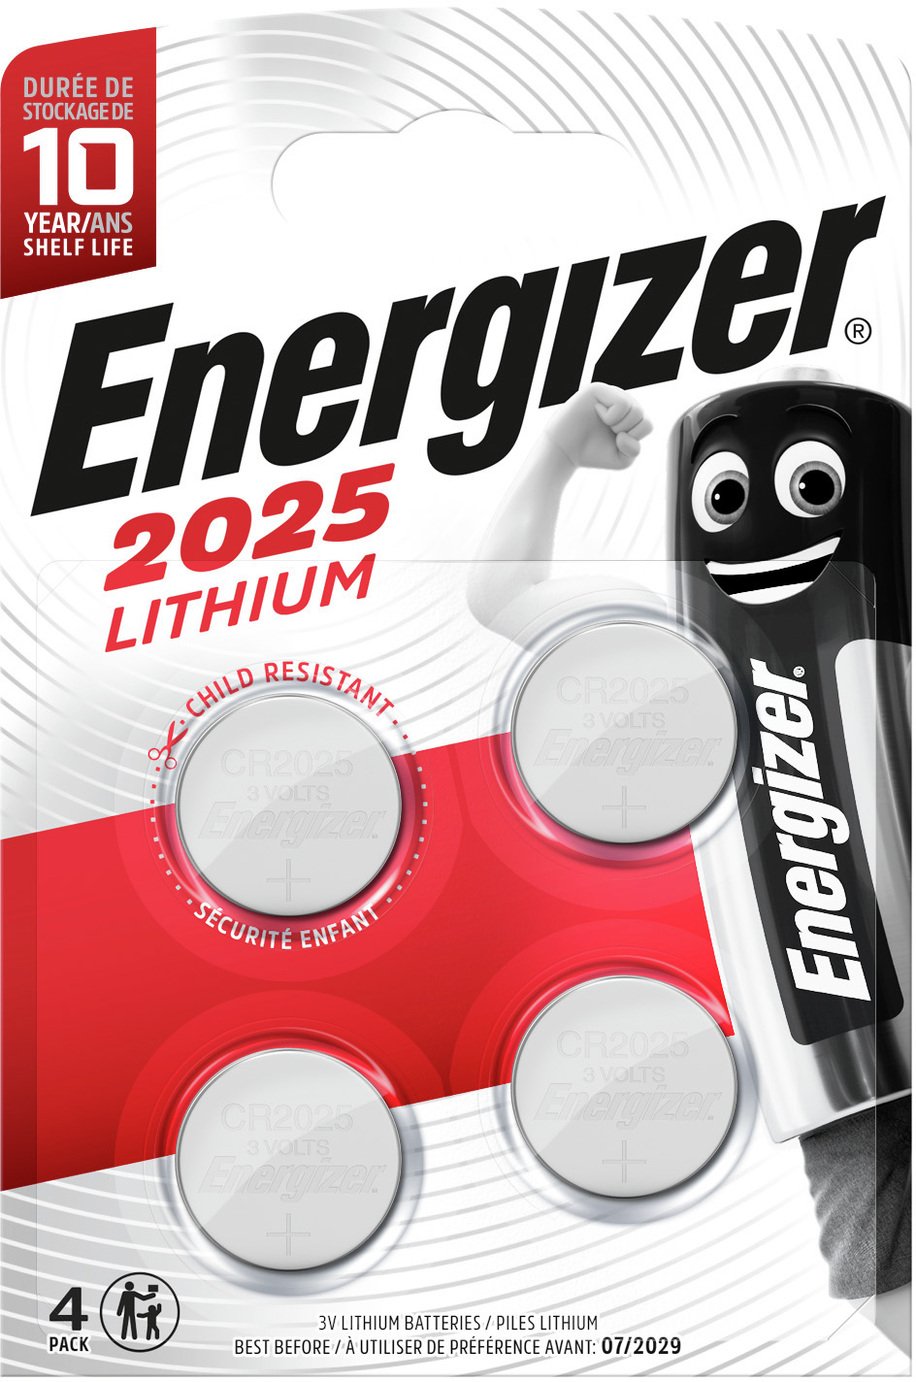 Energizer 2025 Lithium Coin Batteries - 4 Pack